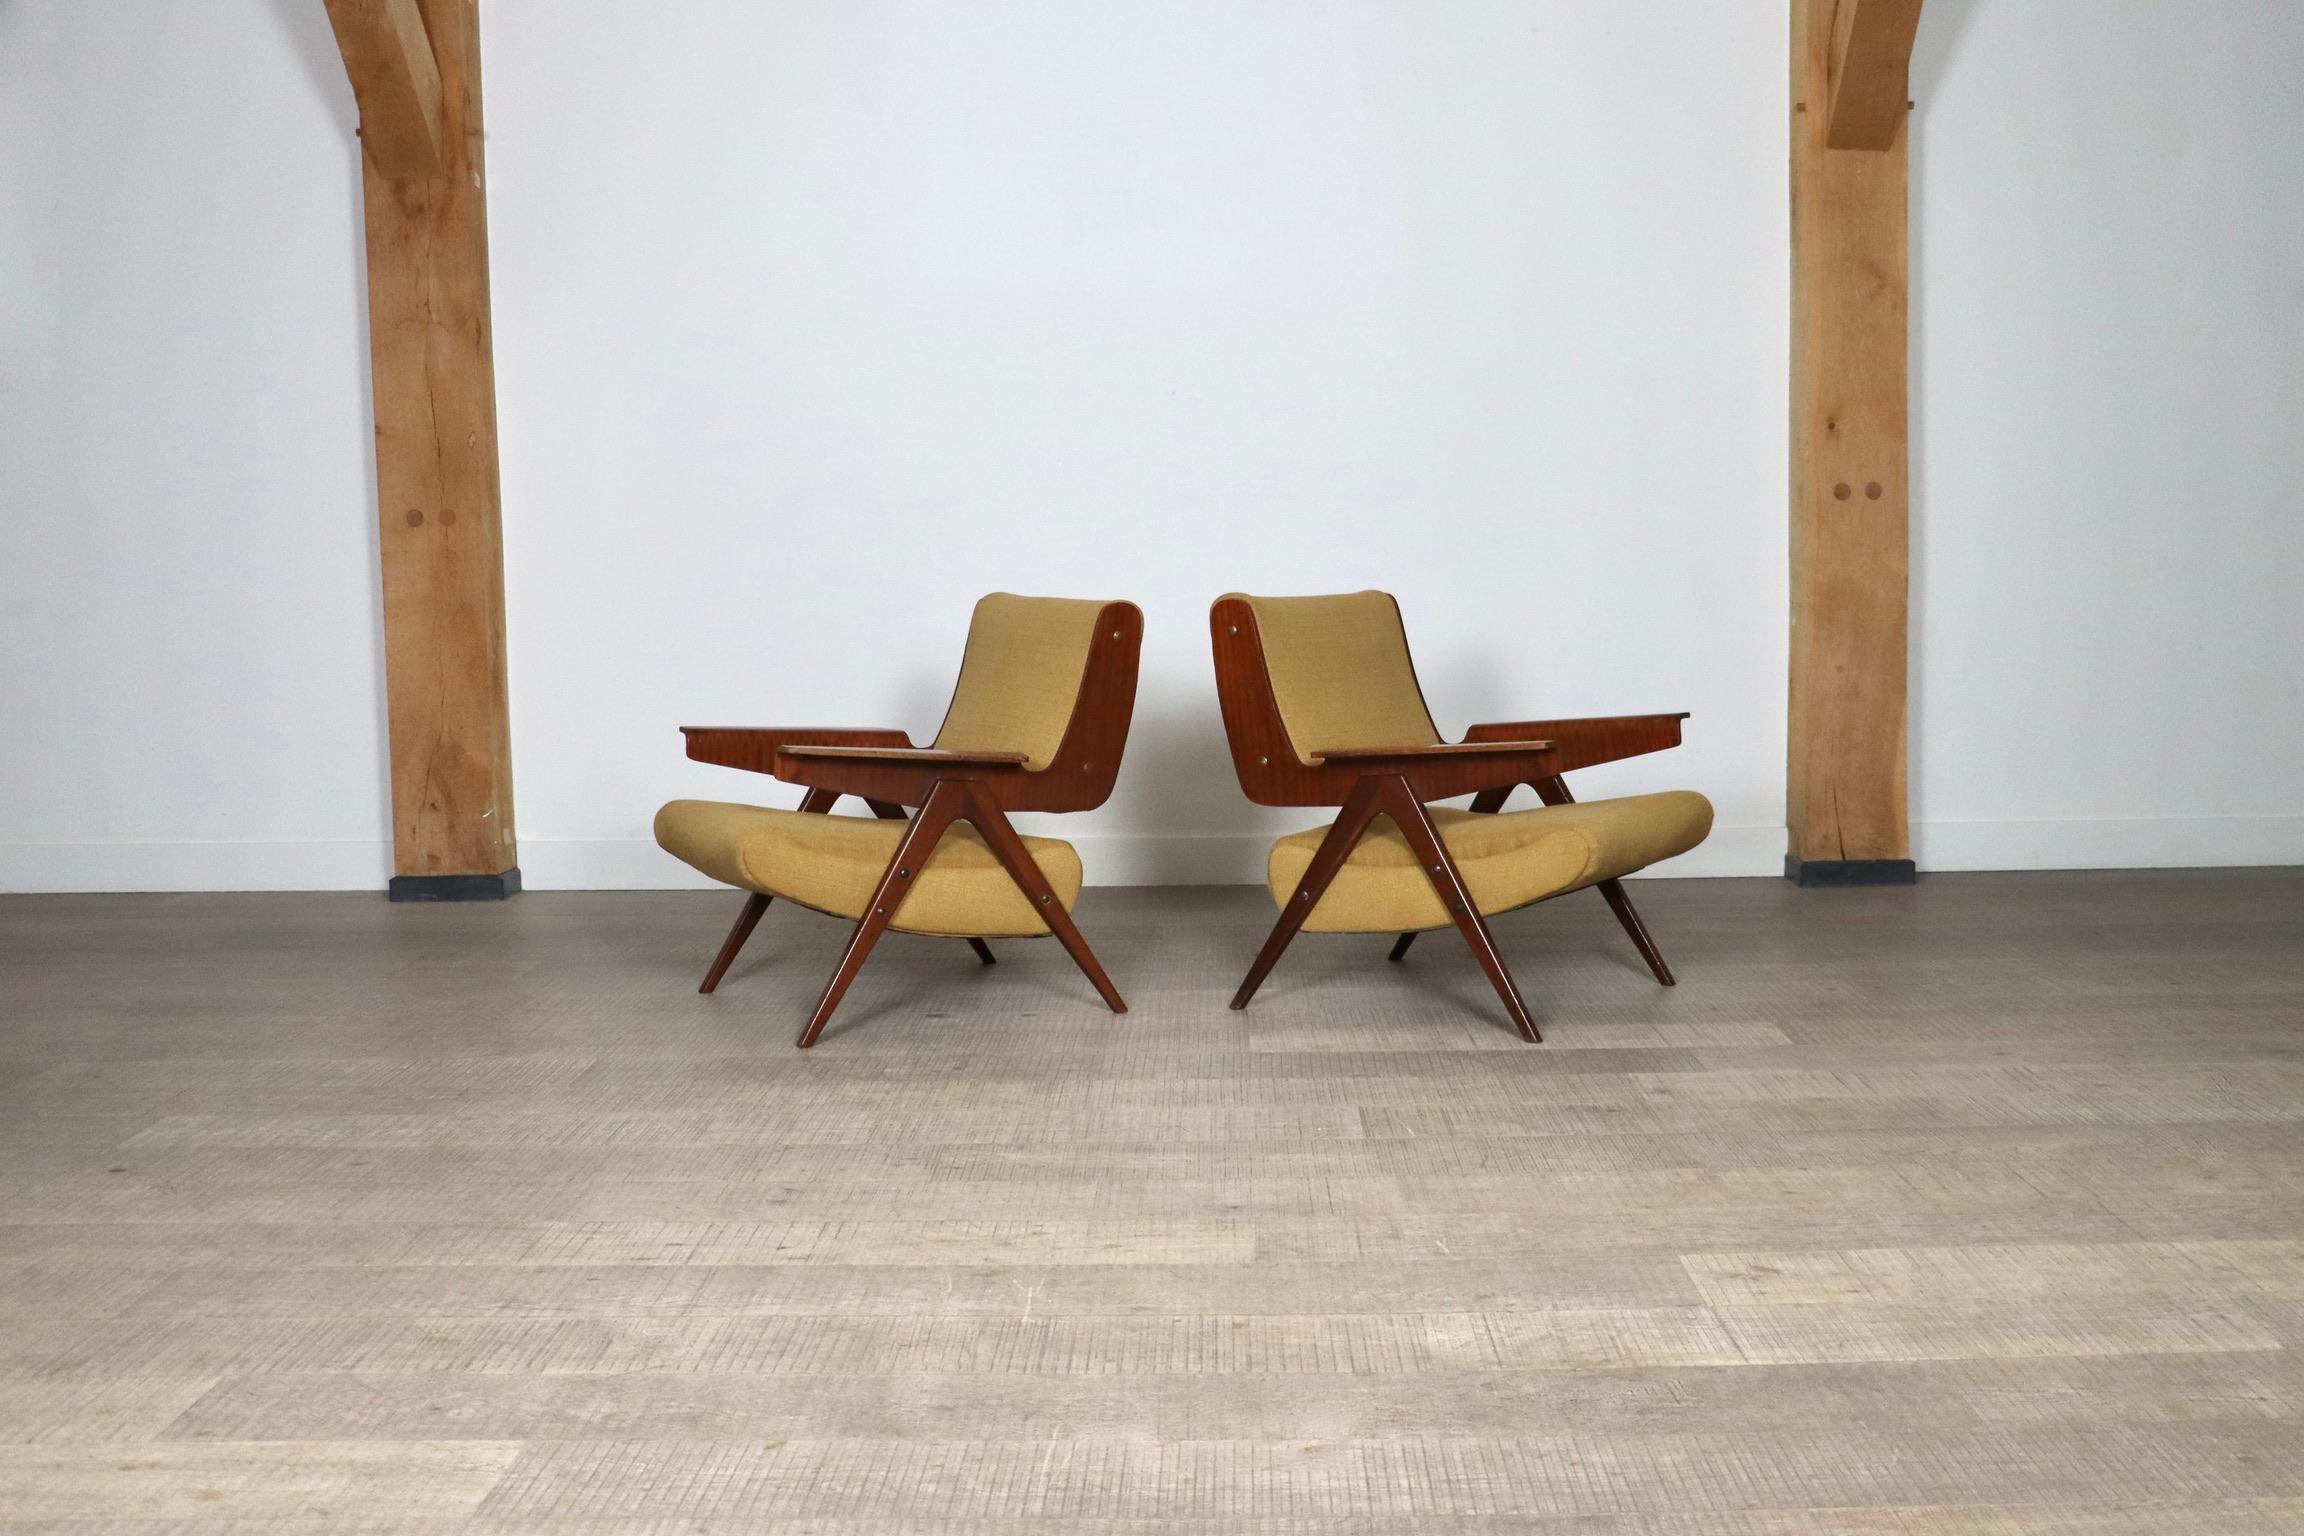 Upholstery Pair Of Gianfranco Frattini Model 831 Lounge Chairs For Cassina, 1950s For Sale